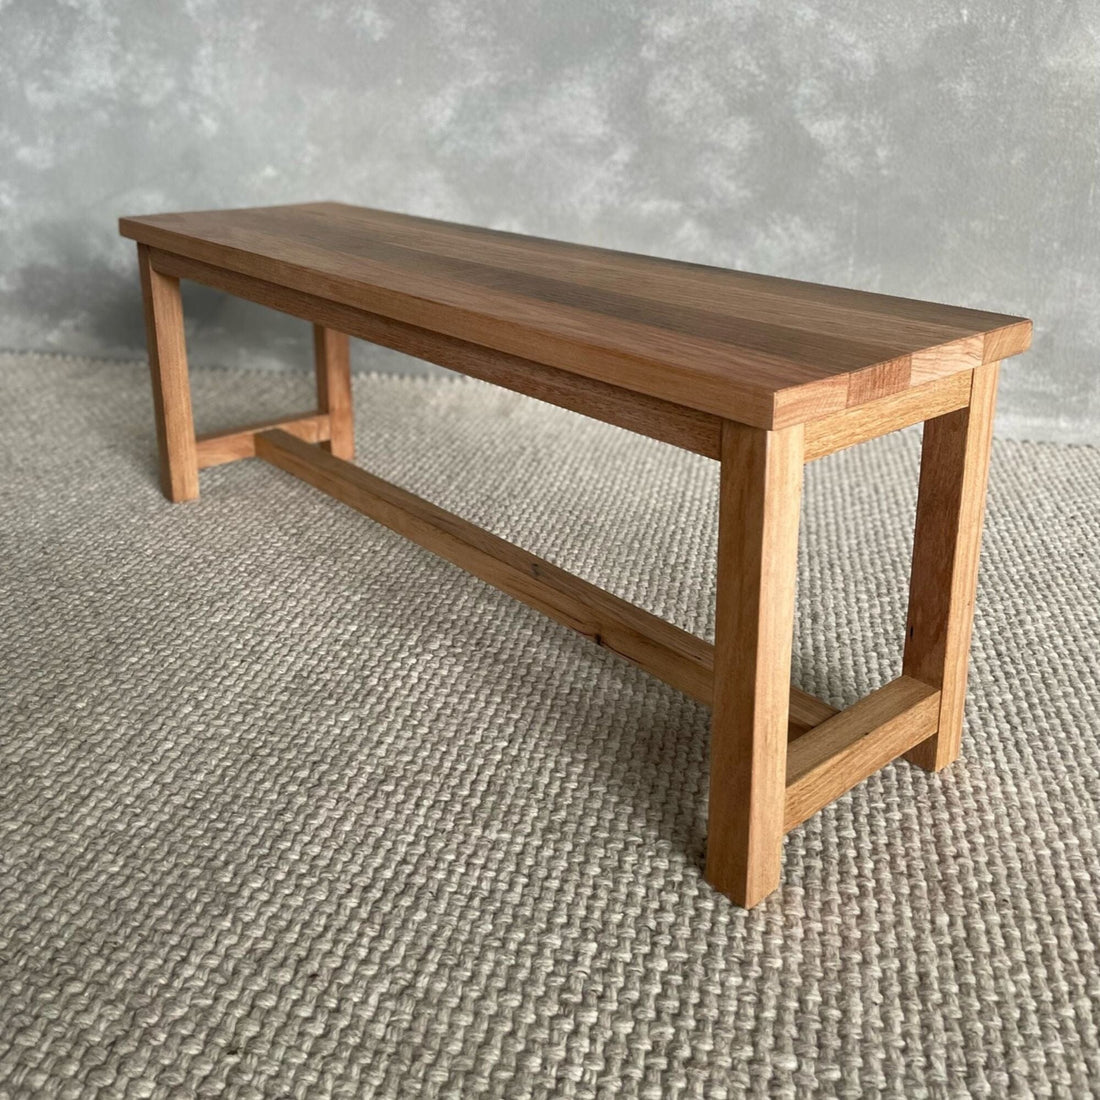 Locally Made Refectory Bench Seat Dining Furniture Beachwood Designs 